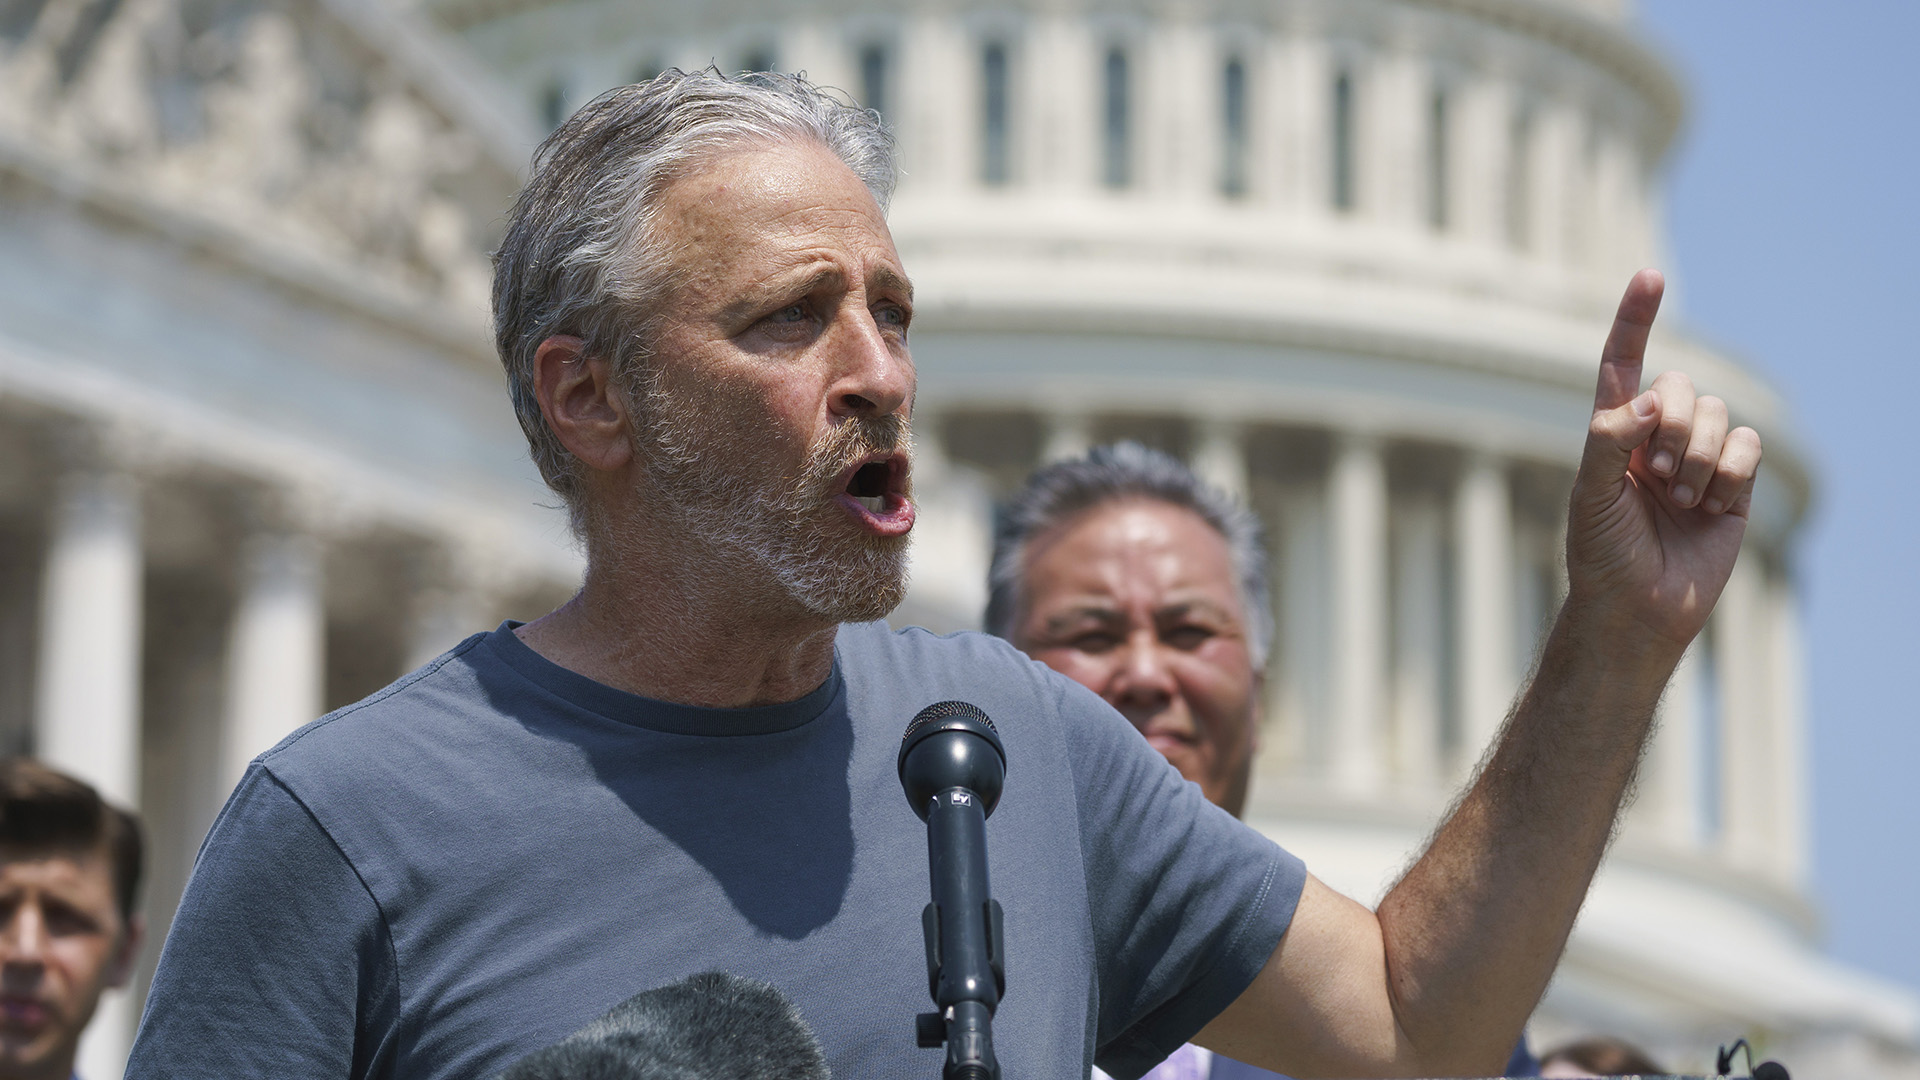 Jon Stewart to Senate Republicans: Stop playing political games with veterans’ lives